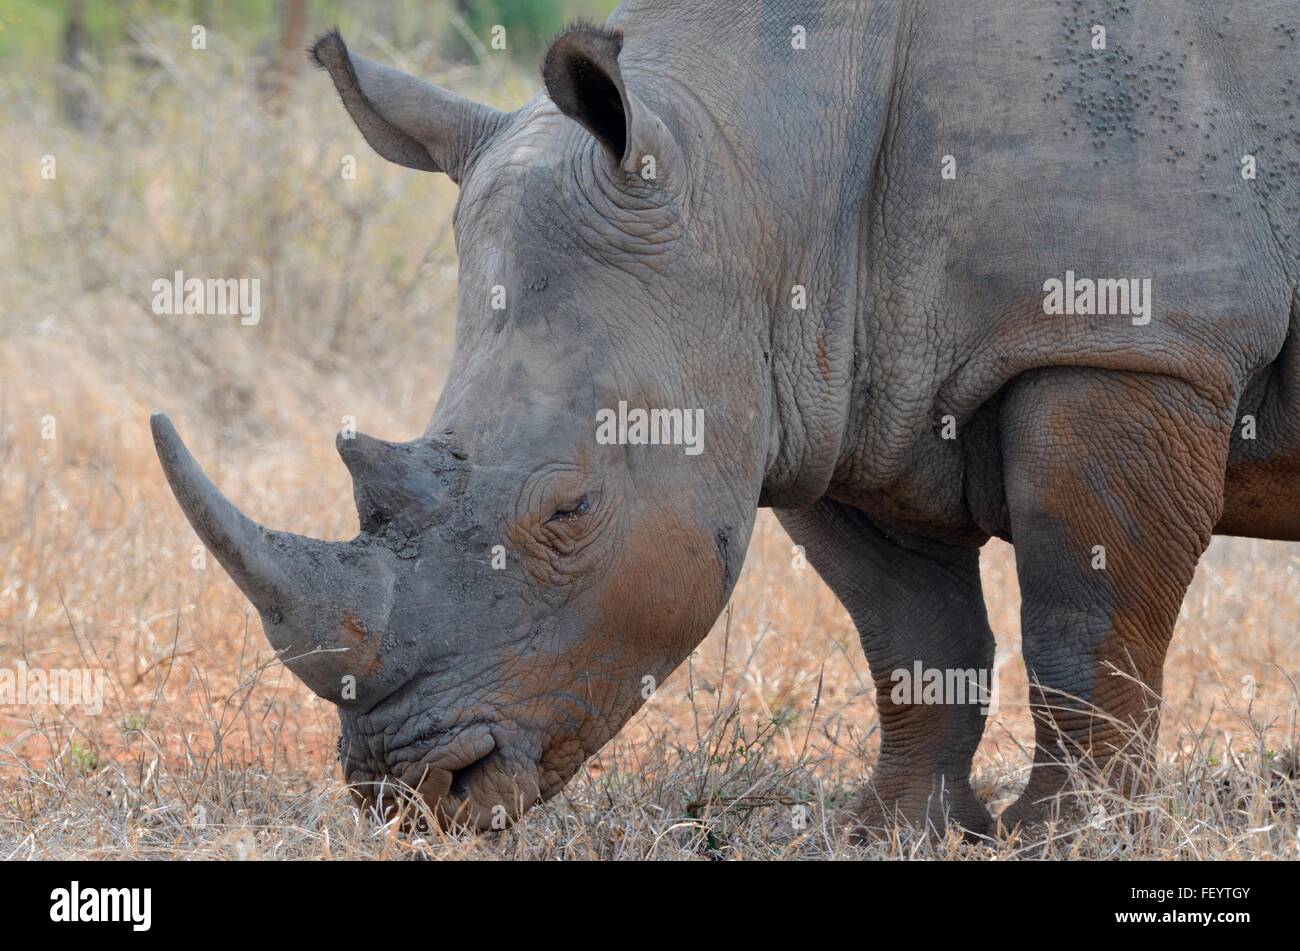 White rhinoceros or Square-lipped rhinoceros (Ceratotherium simum), standing in dry grass, Kruger National Park, South Africa Stock Photo